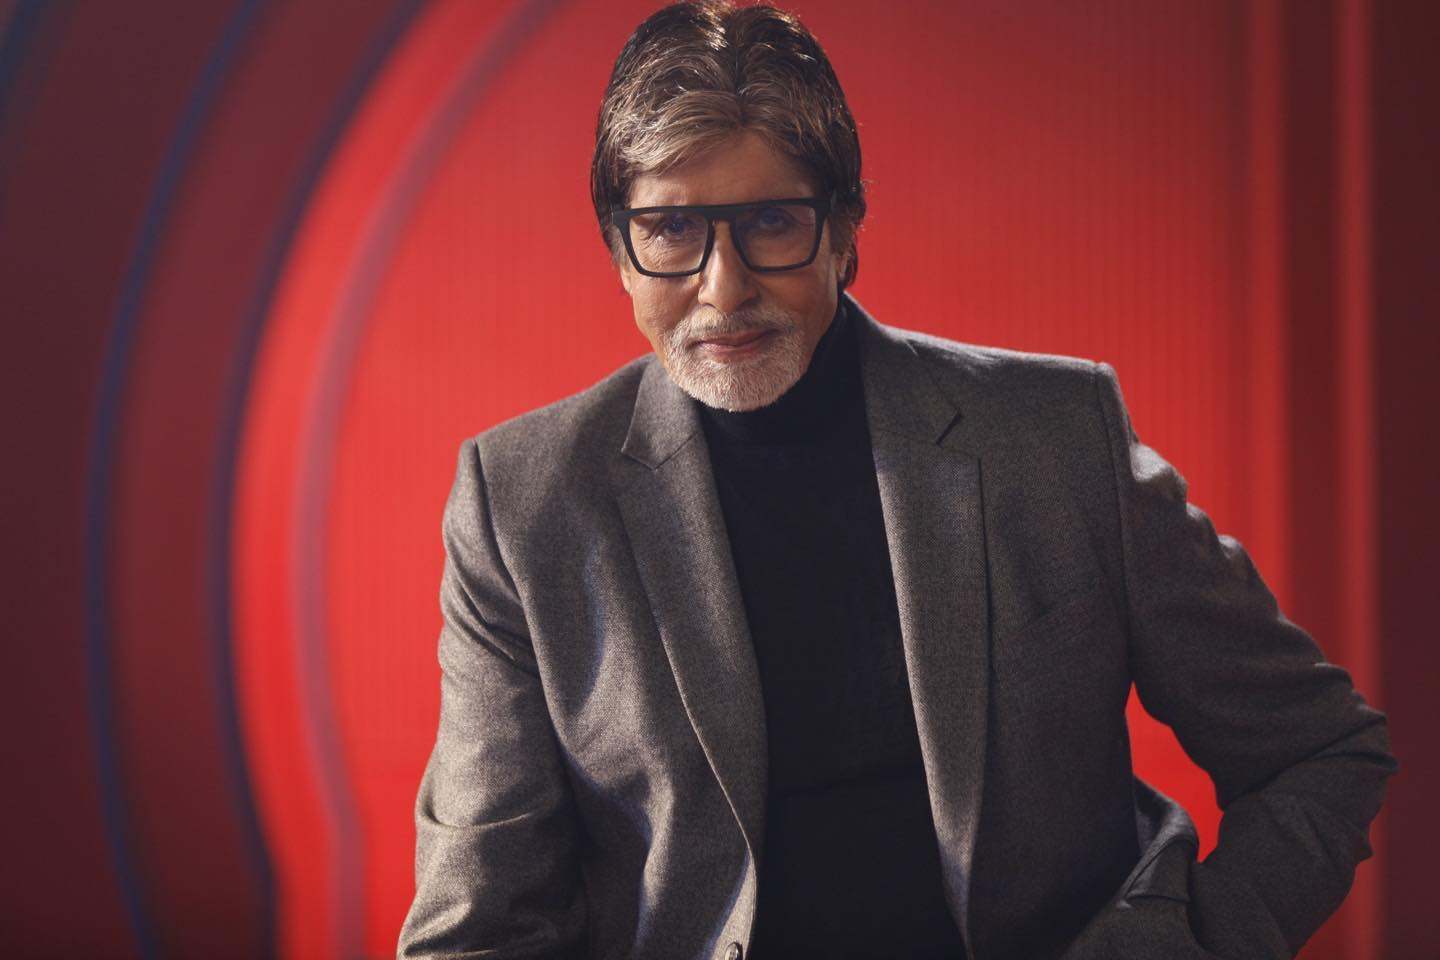 Amitabh Bachchan has earned millions from his films – and sure knows how to live the good life. Photo: @amitabhbachchan/Instagram